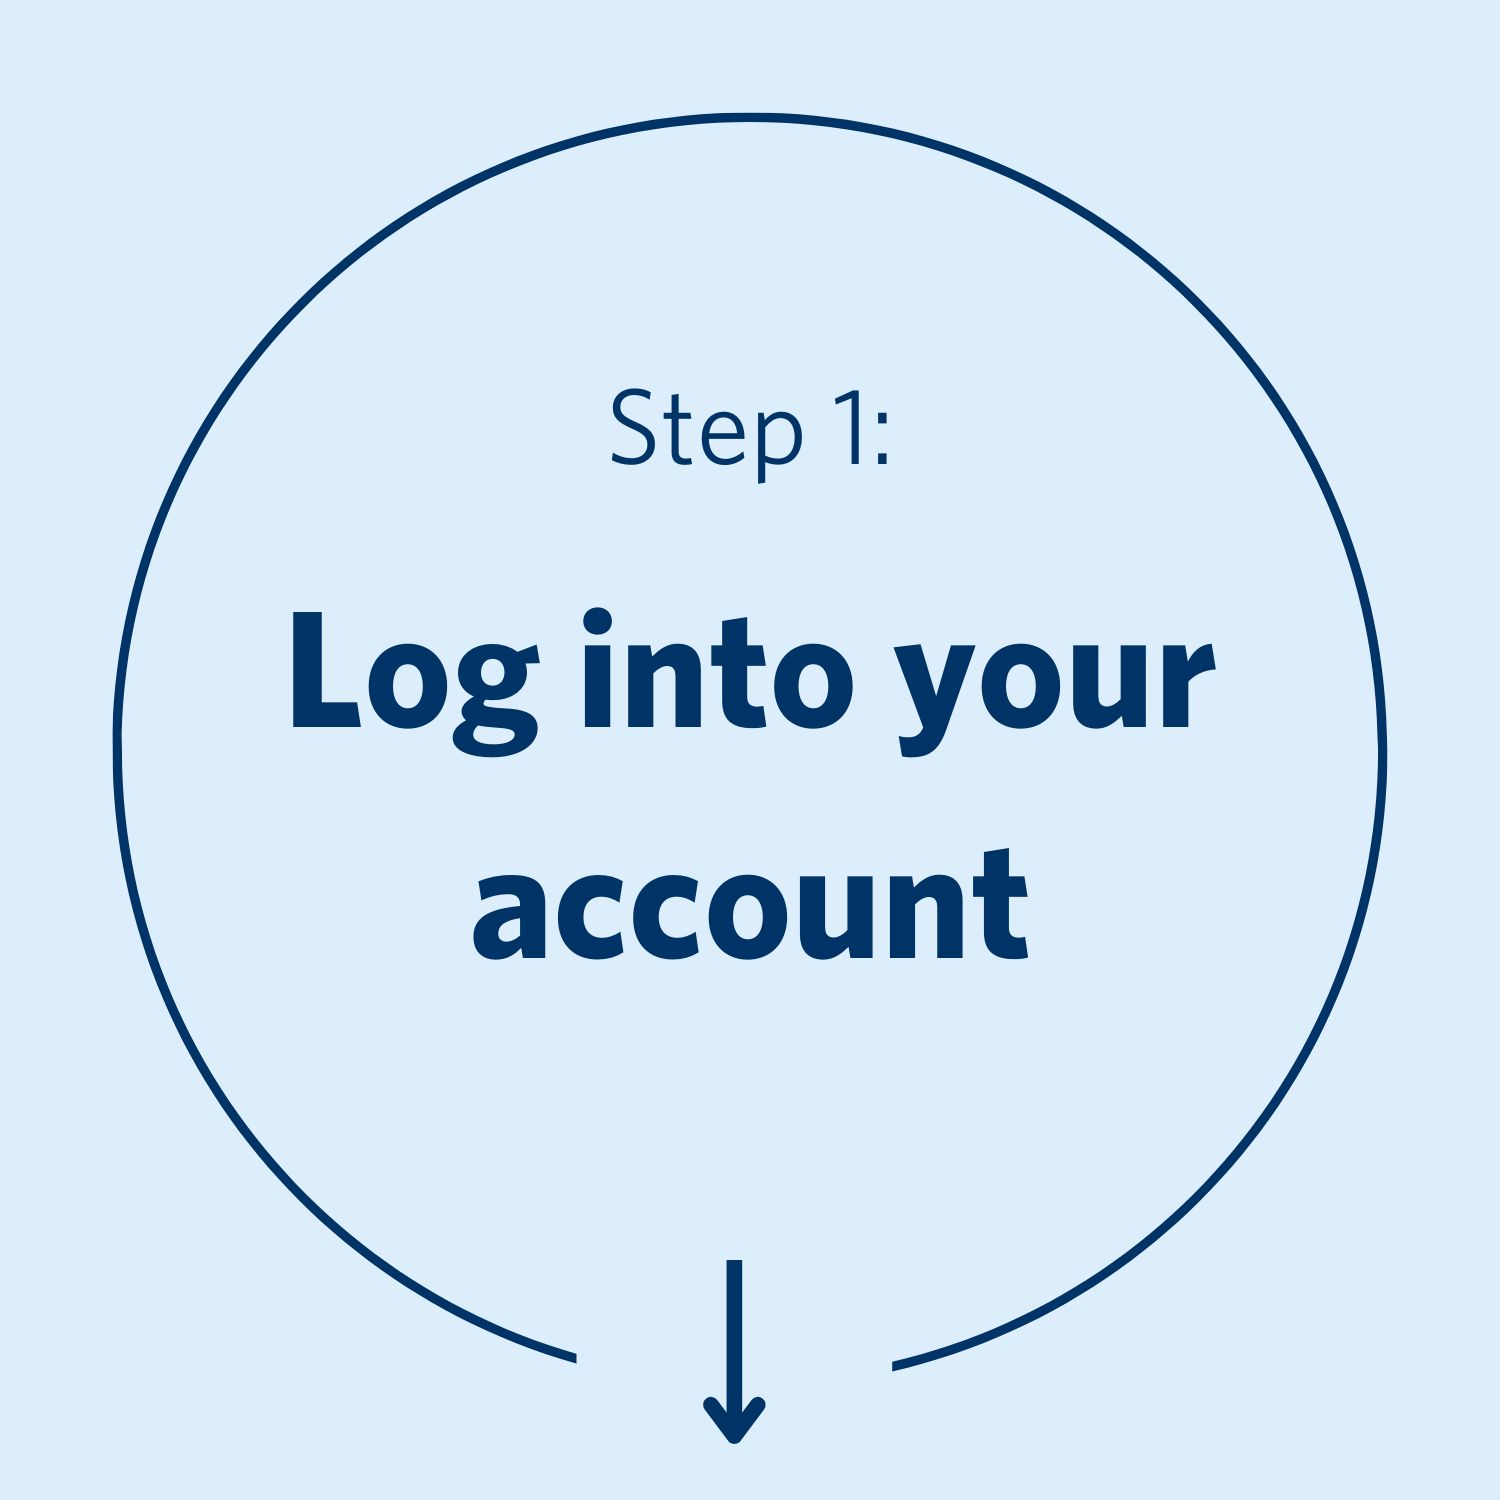 Step 1: Log into your account